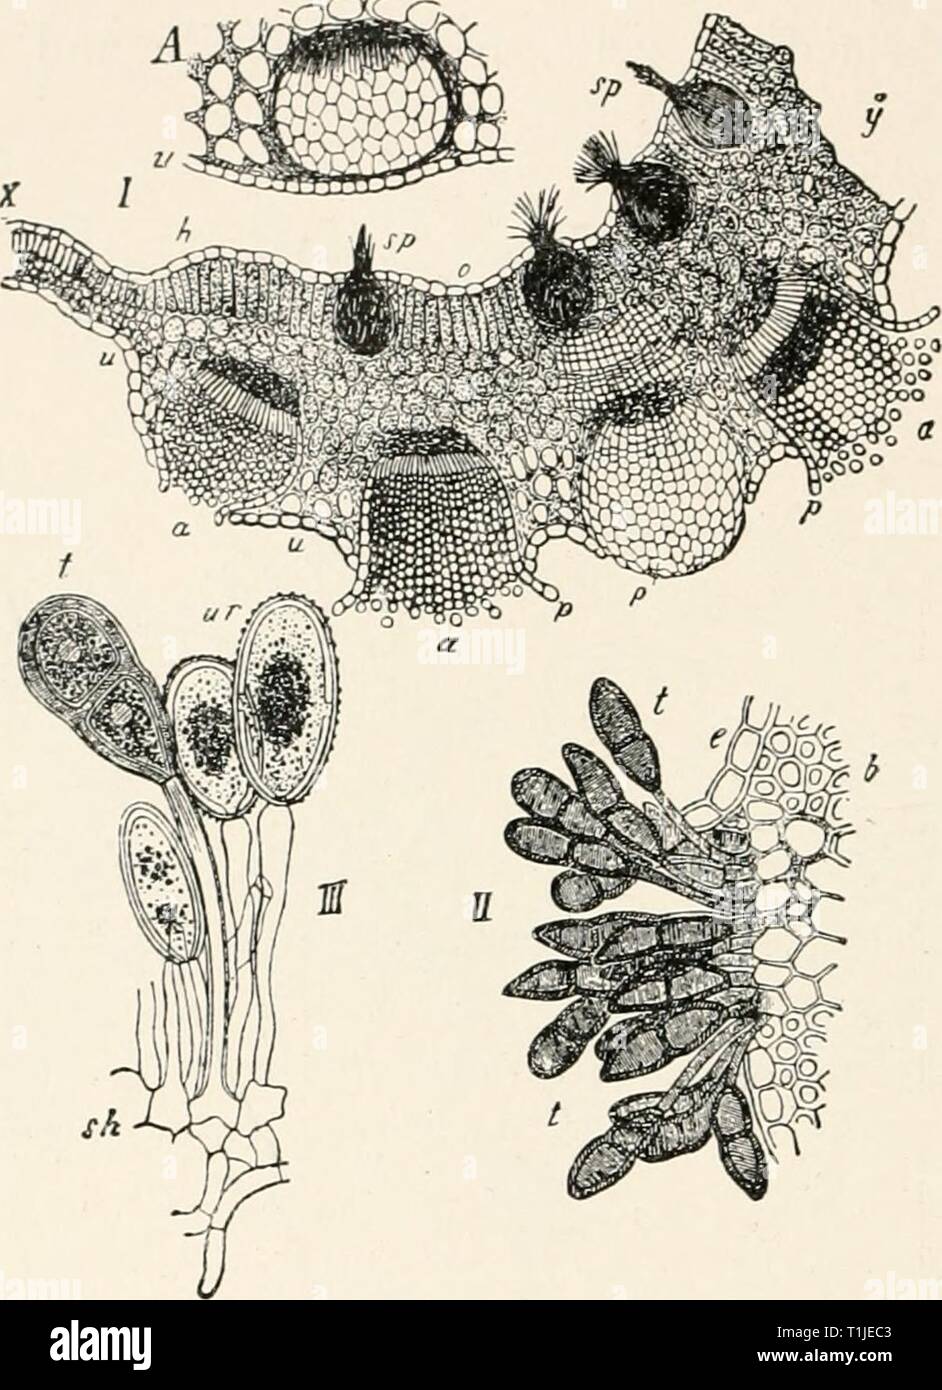 Diseases of plants induced by Diseases of plants induced by cryptogamuc parasites; introduction to the study of pathogenic fungi, slime-fungi, bacteria, and algae. English ed. by William G. Smith  diseasesofplants00tubeuoft Year: 1897  344 UREDINEAE, through the epidermis. The yellow uredospores are abjointed singly frcfra long sporophores ; they are unicellular and ovoid, with a thin granular coat beset with germ-pores (Fig. 184). The uredo- spores are easily conveyed to other grass-plants and germinate at once, their germ-tubes entering by a stoma and developing into a mycelium, which can pr Stock Photo